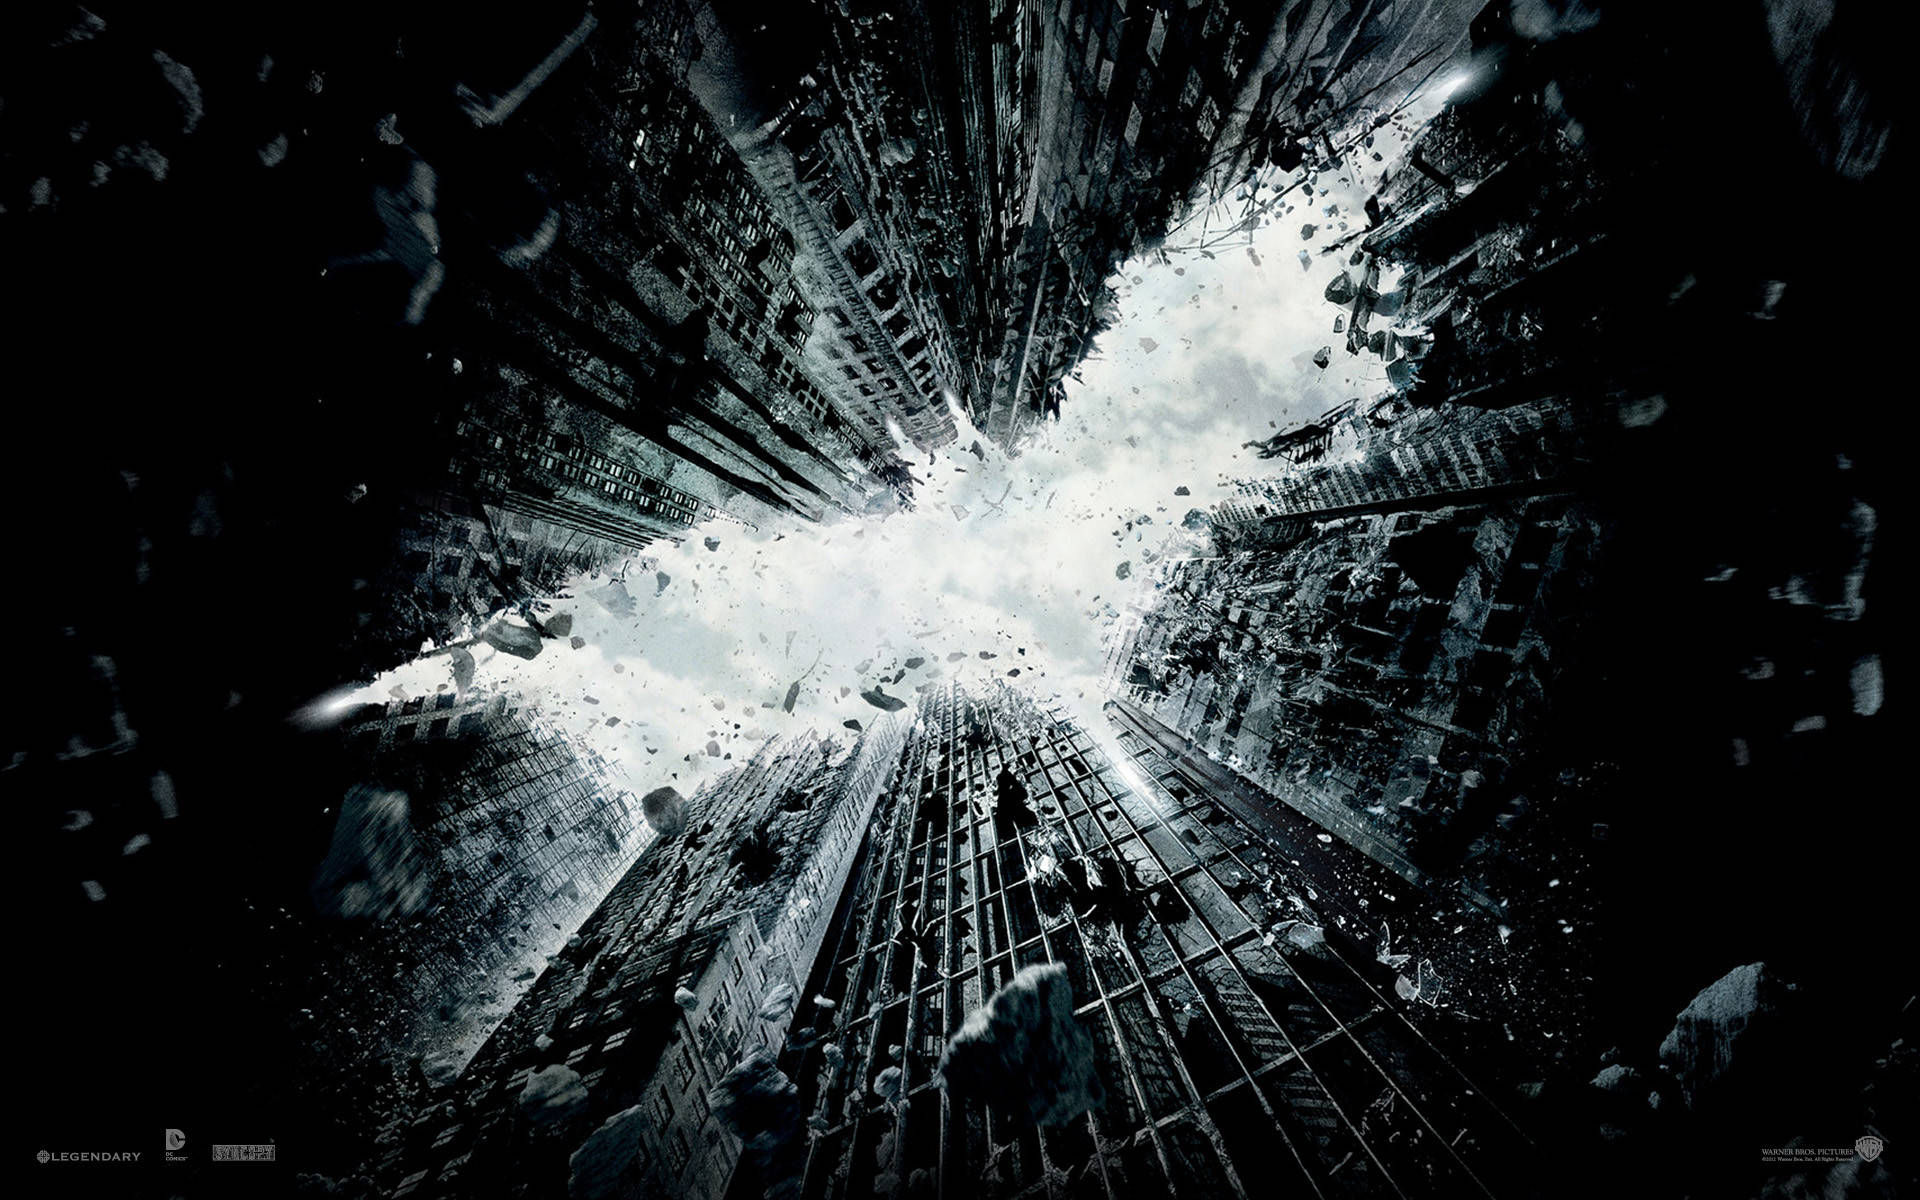 The Dark Knight 1920X1200 Wallpaper and Background Image